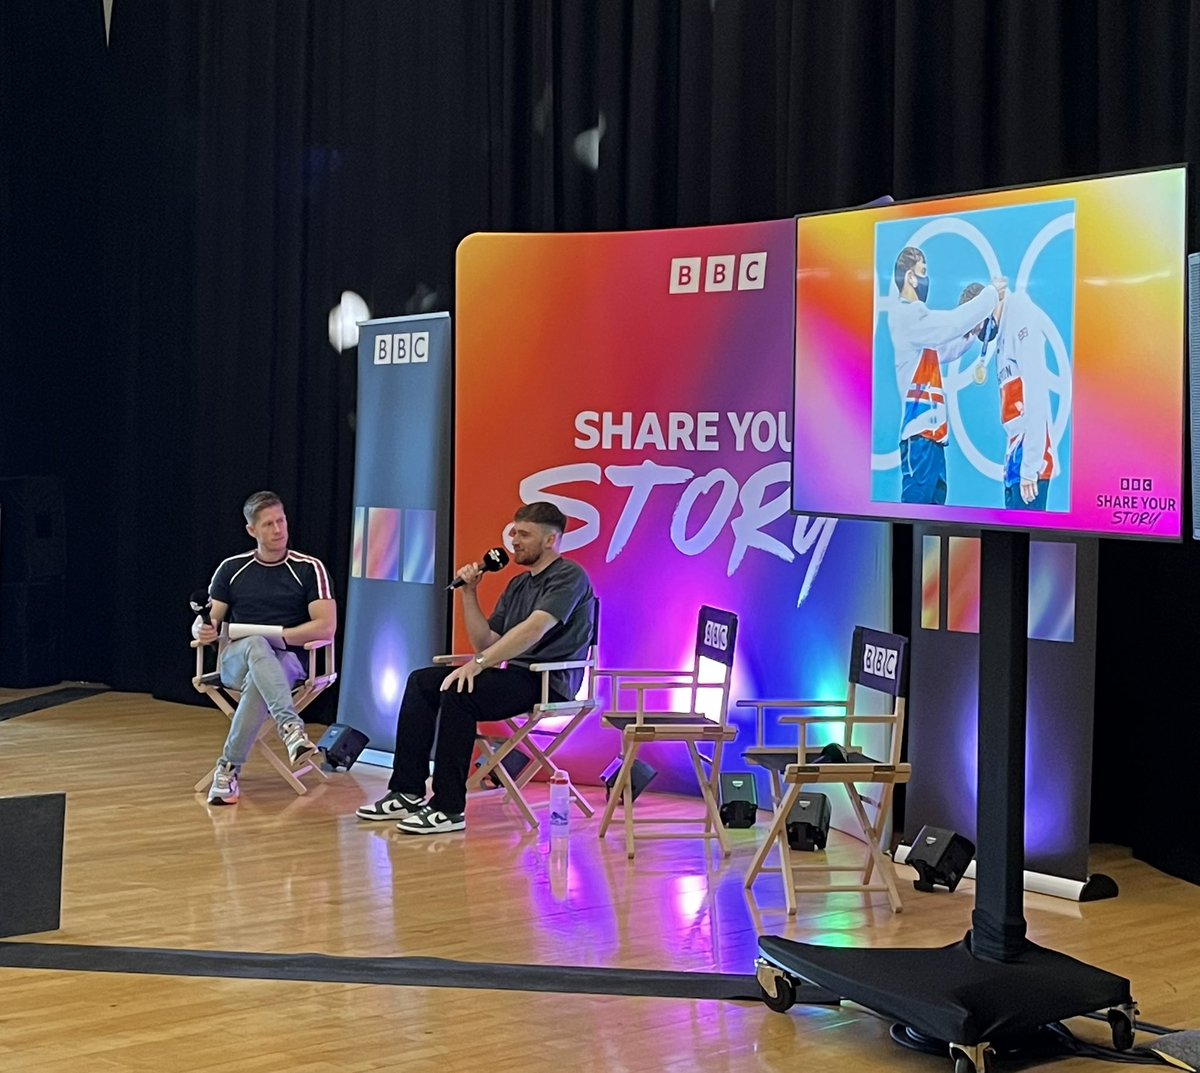 Today we have a very exciting event taking place in school as part of the BBC’s 100th birthday 🎉 Through the power of storytelling, we’re joined by CMCS alumni @mattydiver 💙 and a selection of our pupils will also be sharing their own personal life stories! #EnjoyAndAchieve